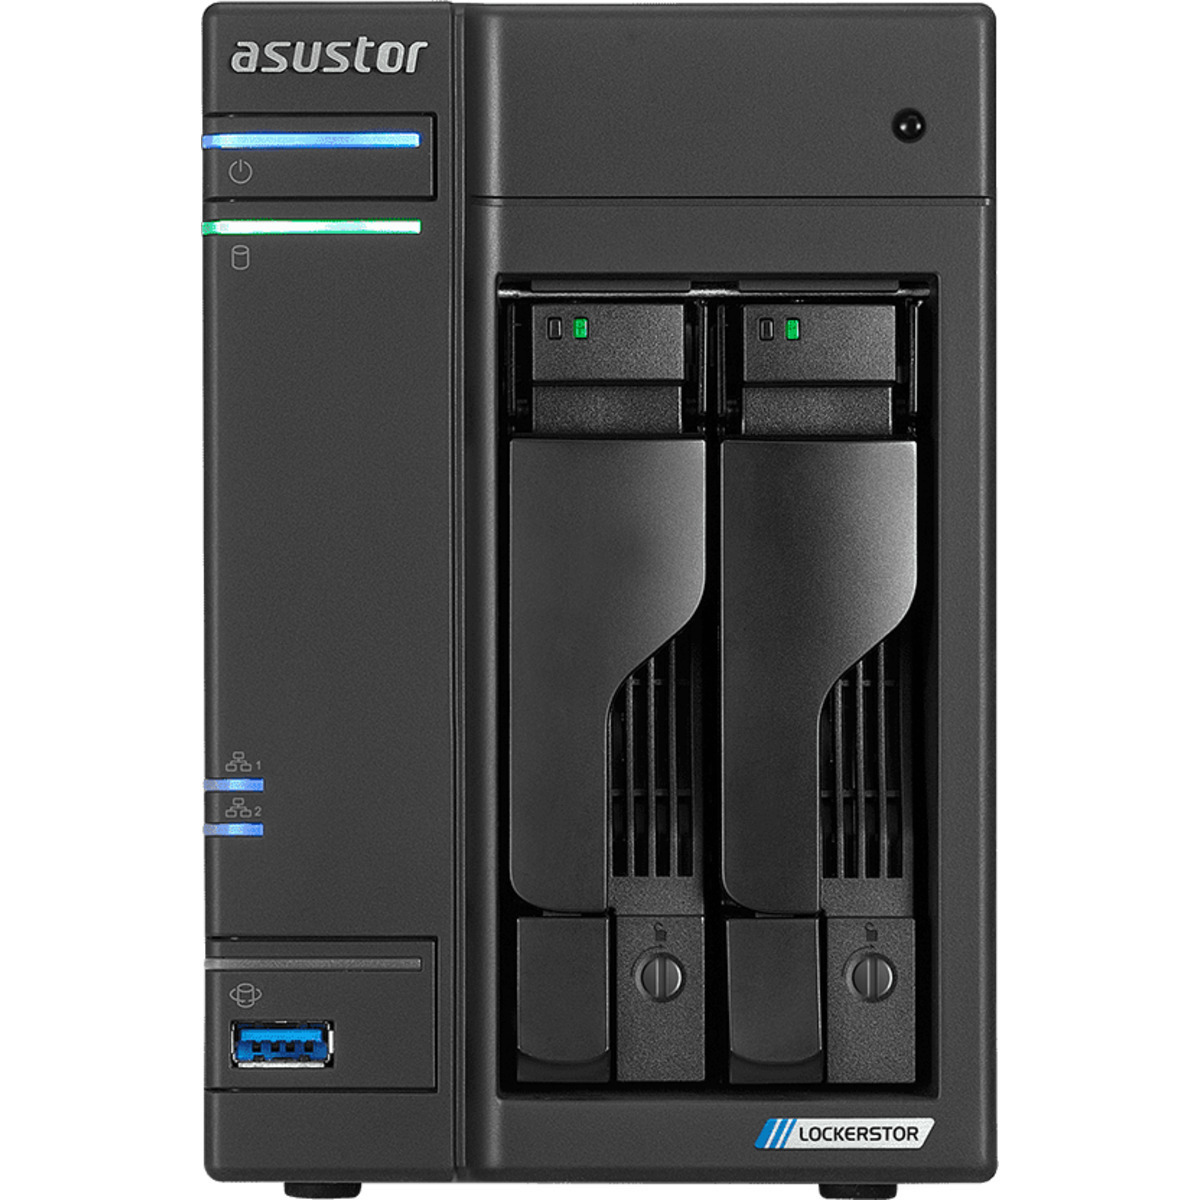 ASUSTOR AS6602T Lockerstor 2 6tb 2-Bay Desktop Multimedia / Power User / Business NAS - Network Attached Storage Device 1x6tb Western Digital Red Pro WD6005FFBX 3.5 7200rpm SATA 6Gb/s HDD NAS Class Drives Installed - Burn-In Tested - FREE RAM UPGRADE AS6602T Lockerstor 2